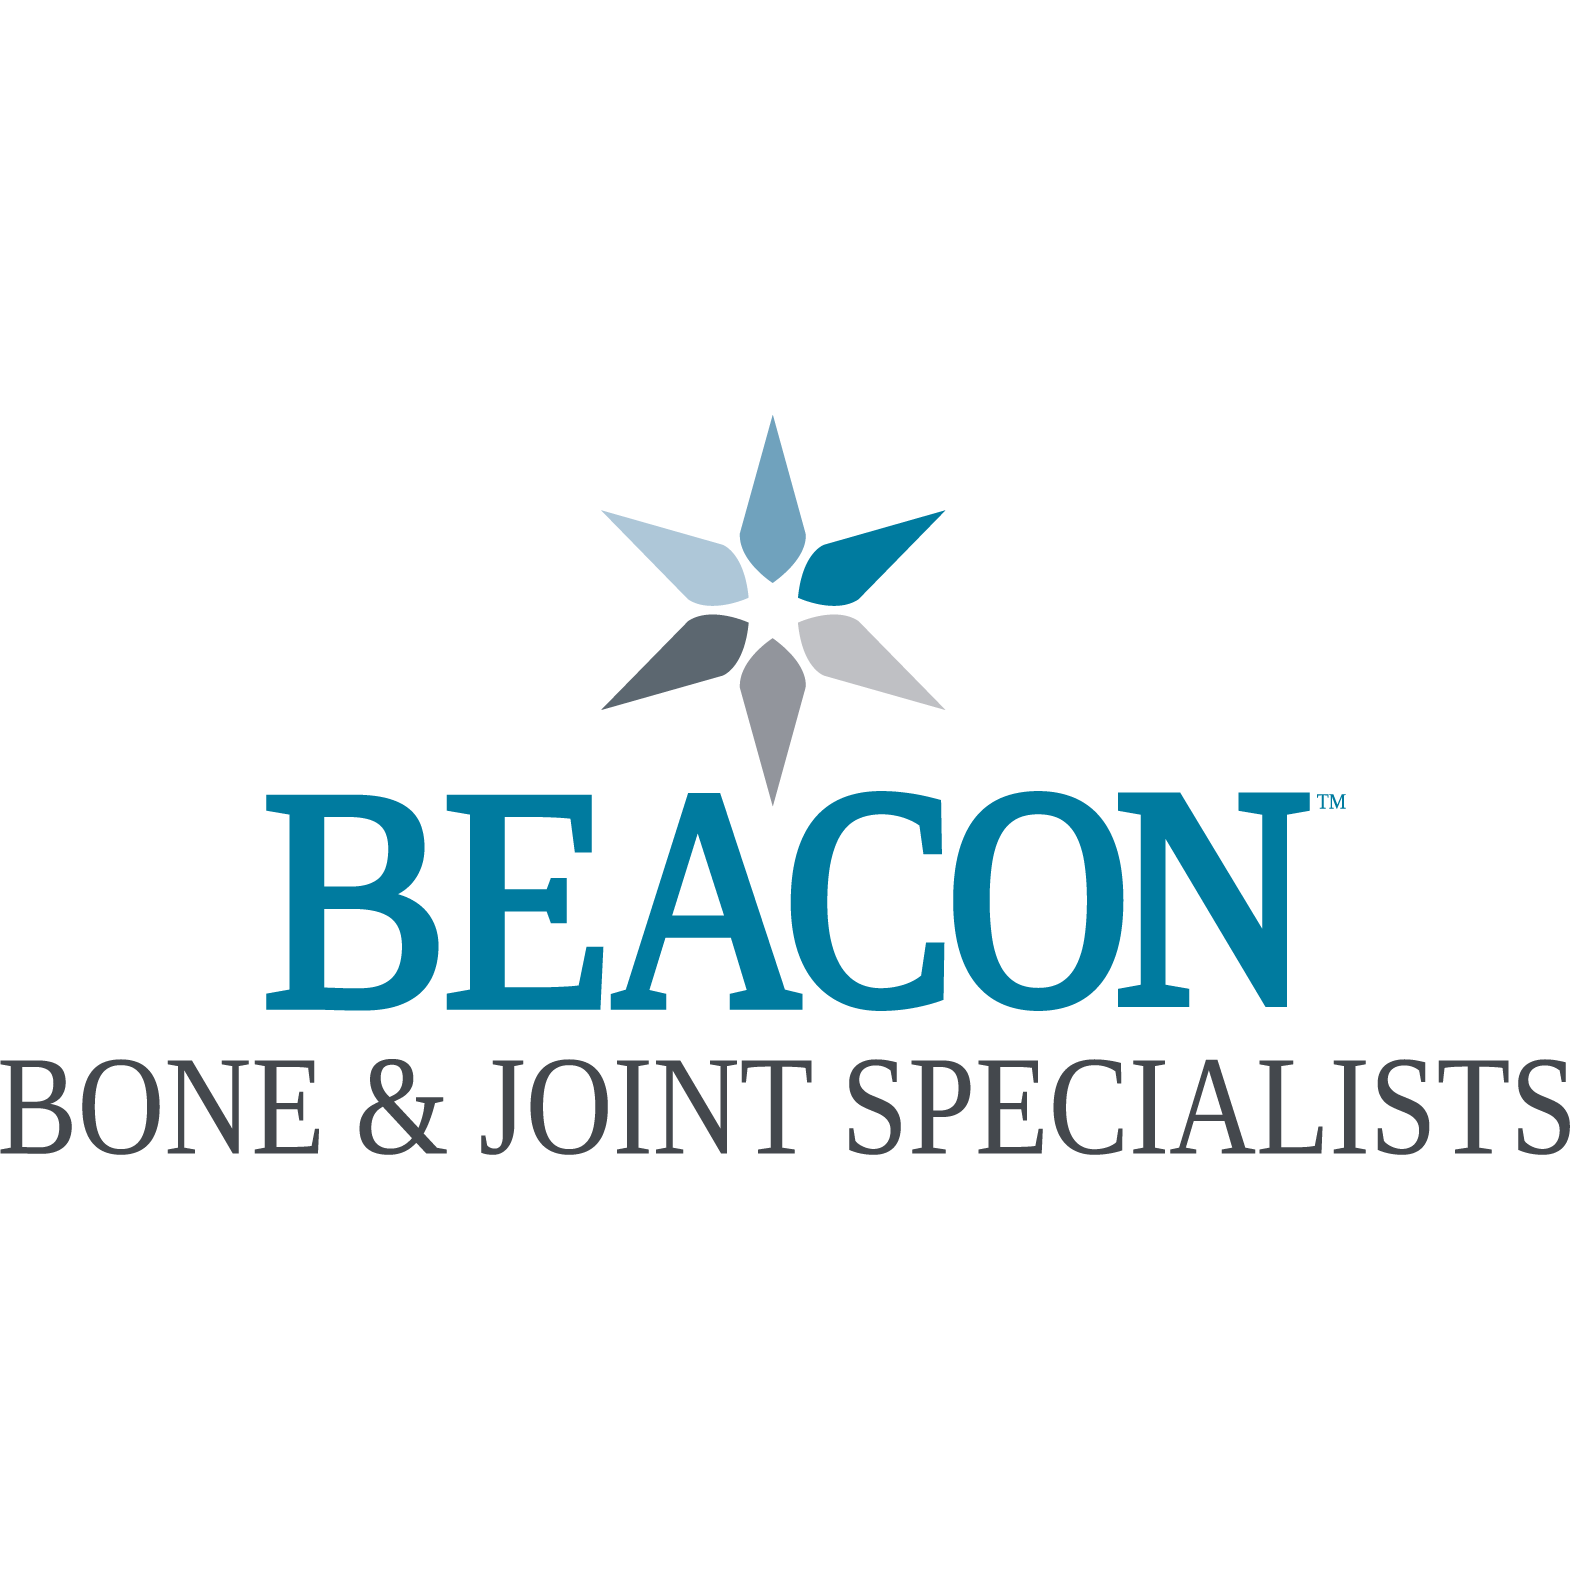 Beacon Bone & Joint Specialists South Bend